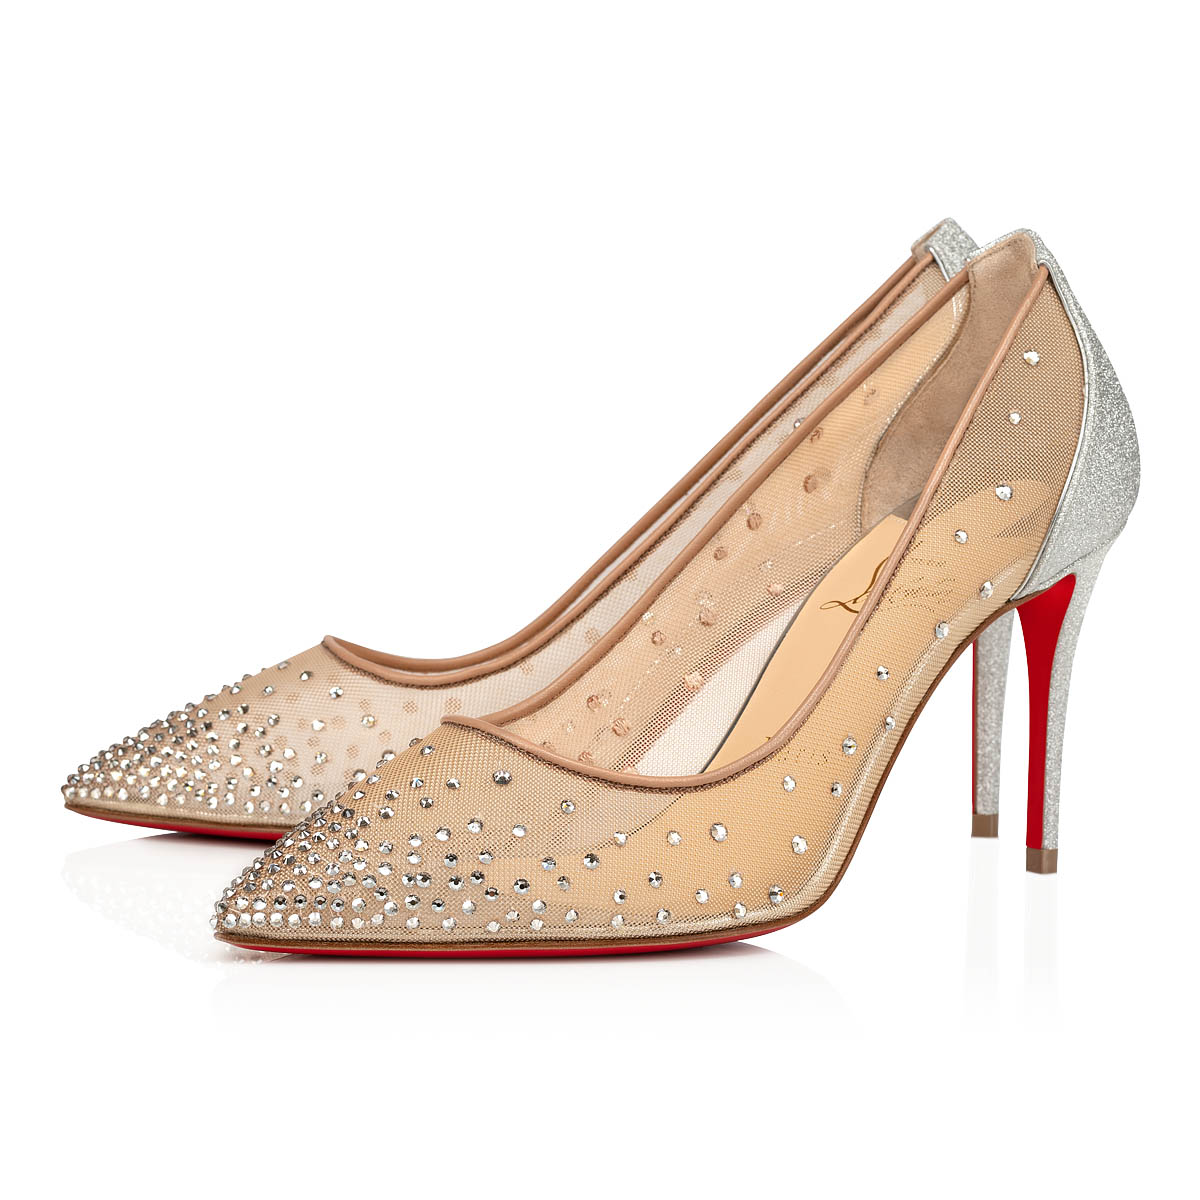 Follies Strass - 85 Pumps - Fishnet, glittered leather and strass - Silver - Christian Louboutin